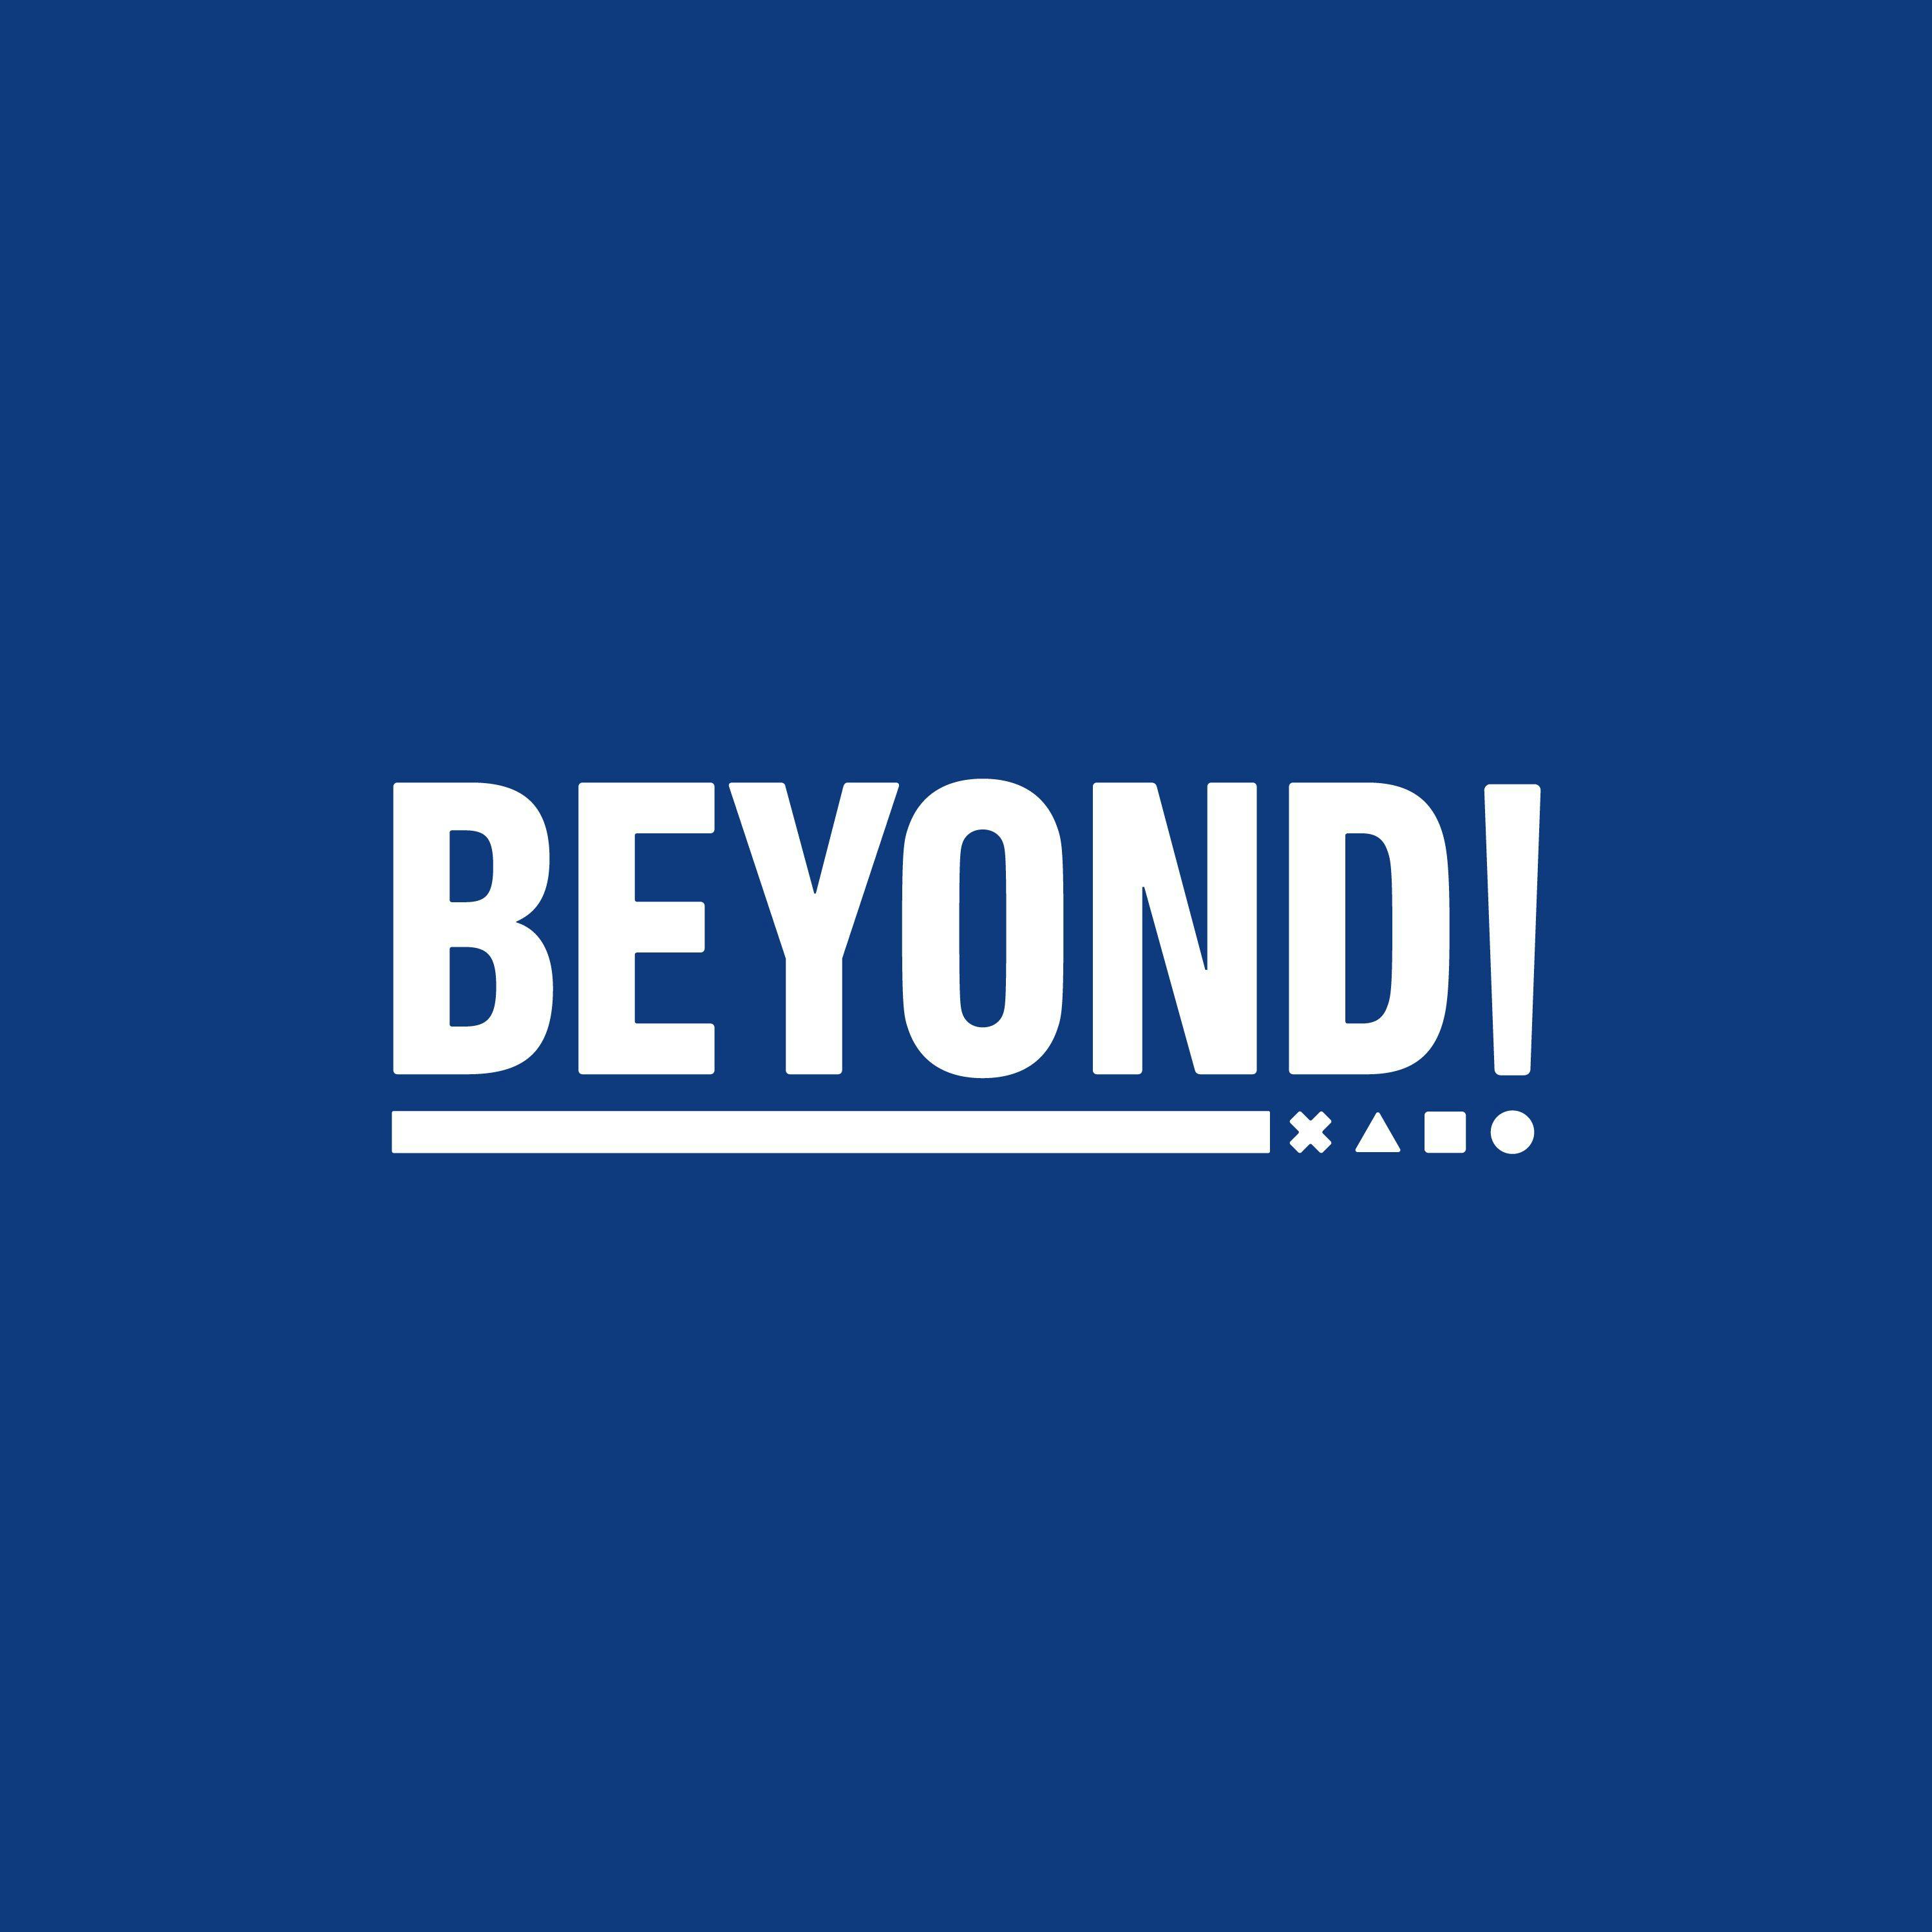 Sony Skips E3 2020! Does Sony Even Need E3? - Podcast Beyond Episode 626